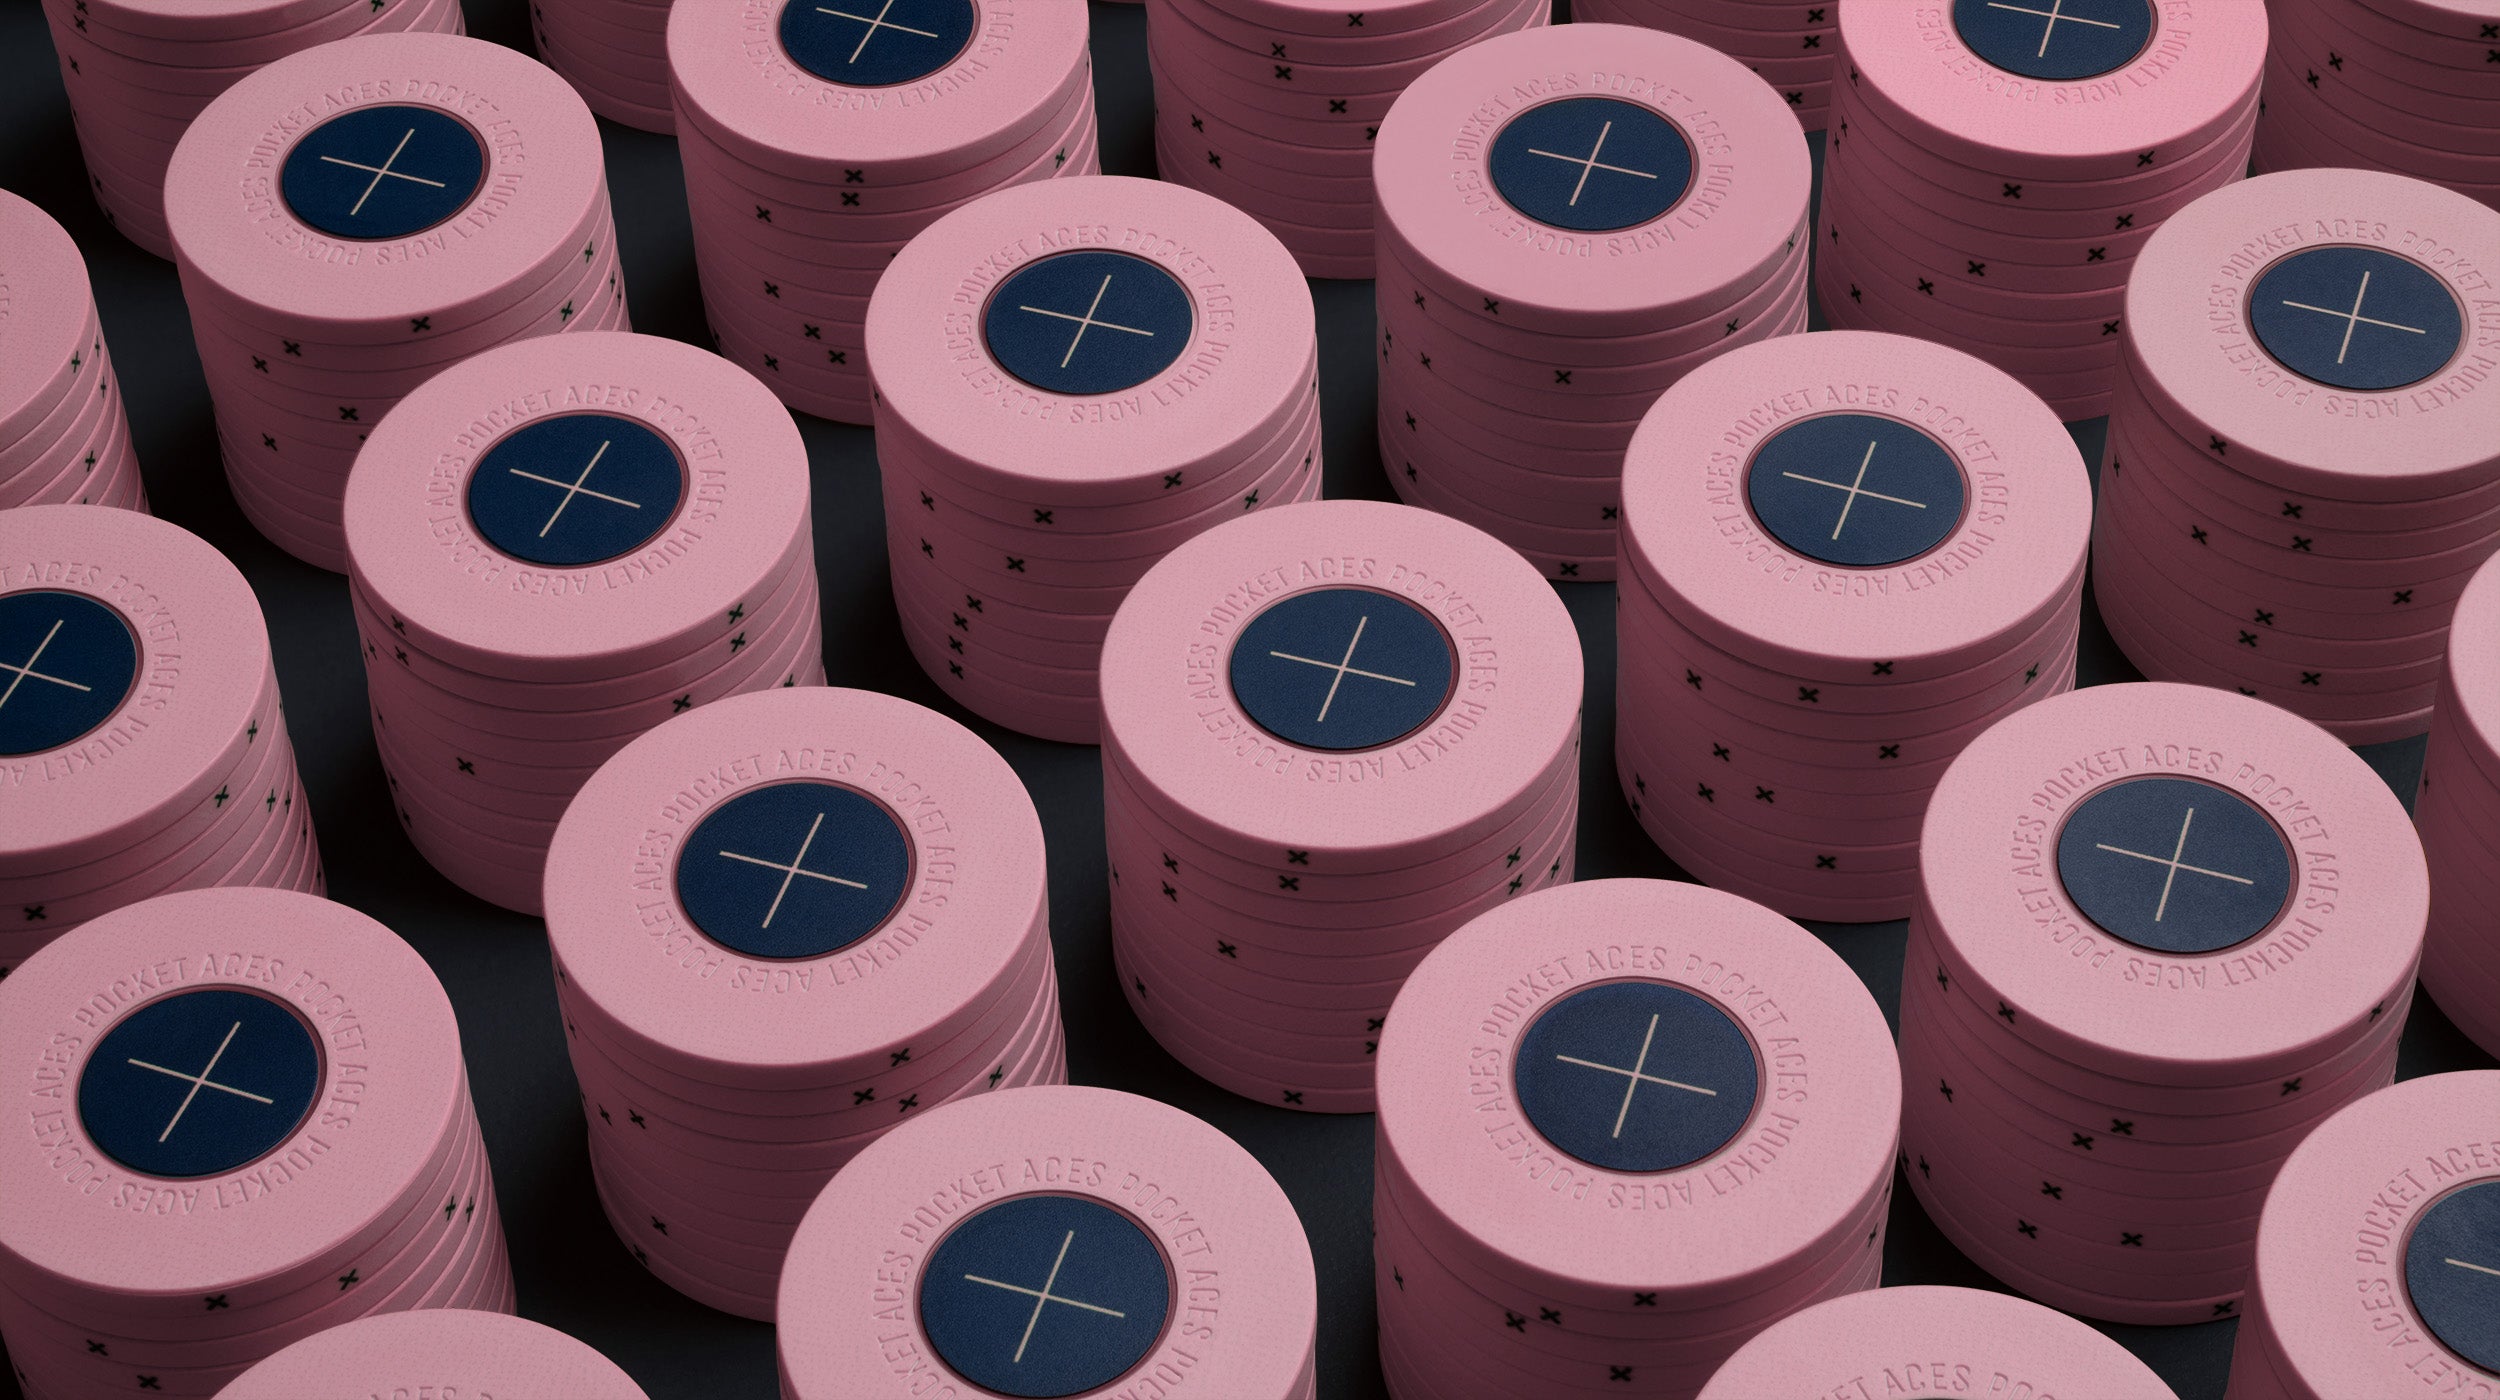 Rows of bubblegum colored poker chips on a table